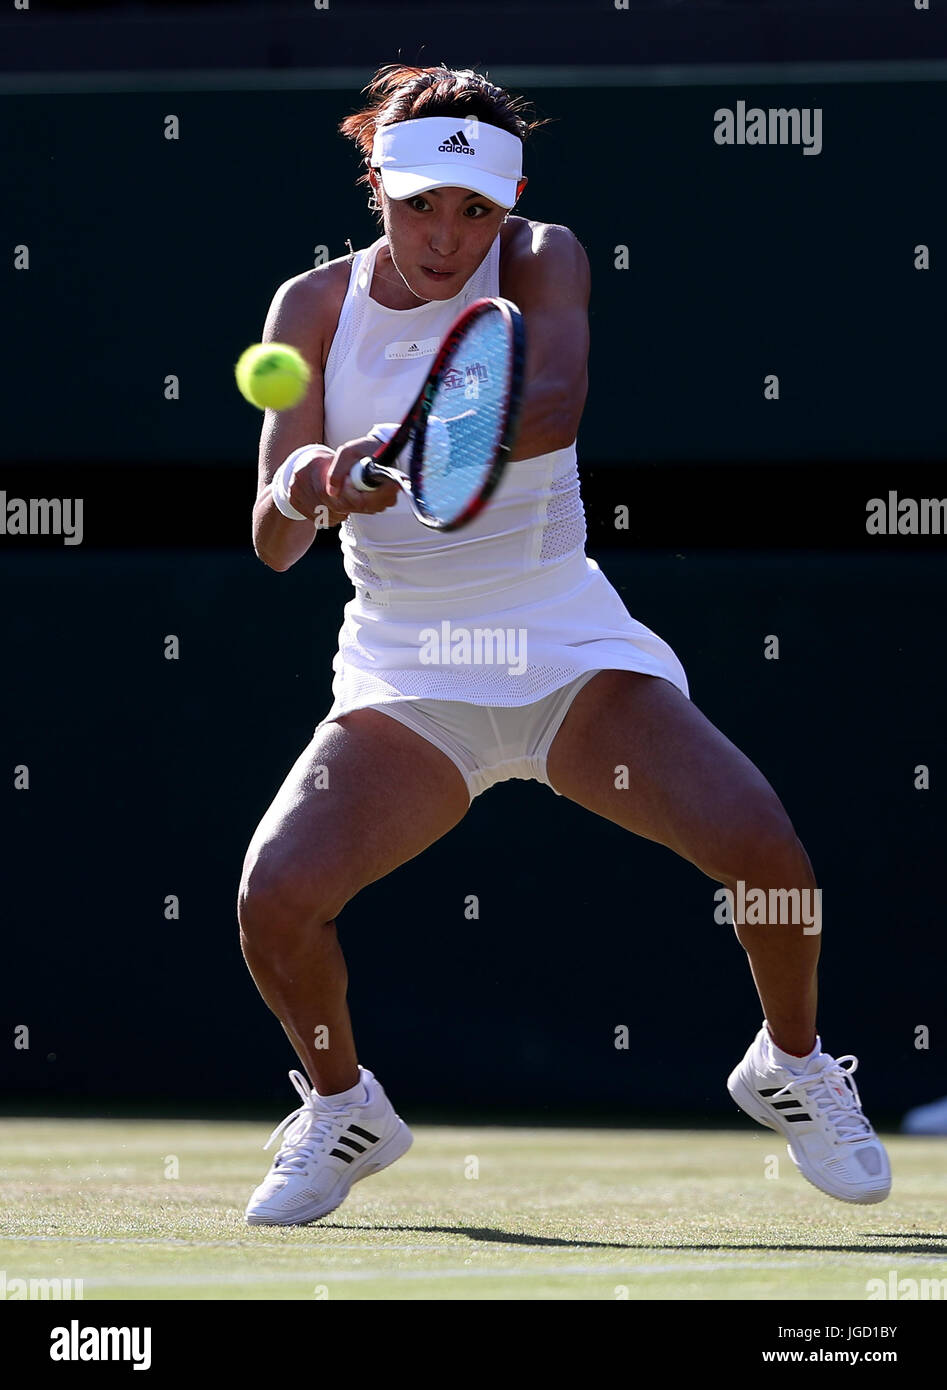 Qiang Wang in action against Venus Williams on day three of the Wimbledon Championships at The All England Lawn Tennis and Croquet Club, Wimbledon. Stock Photo